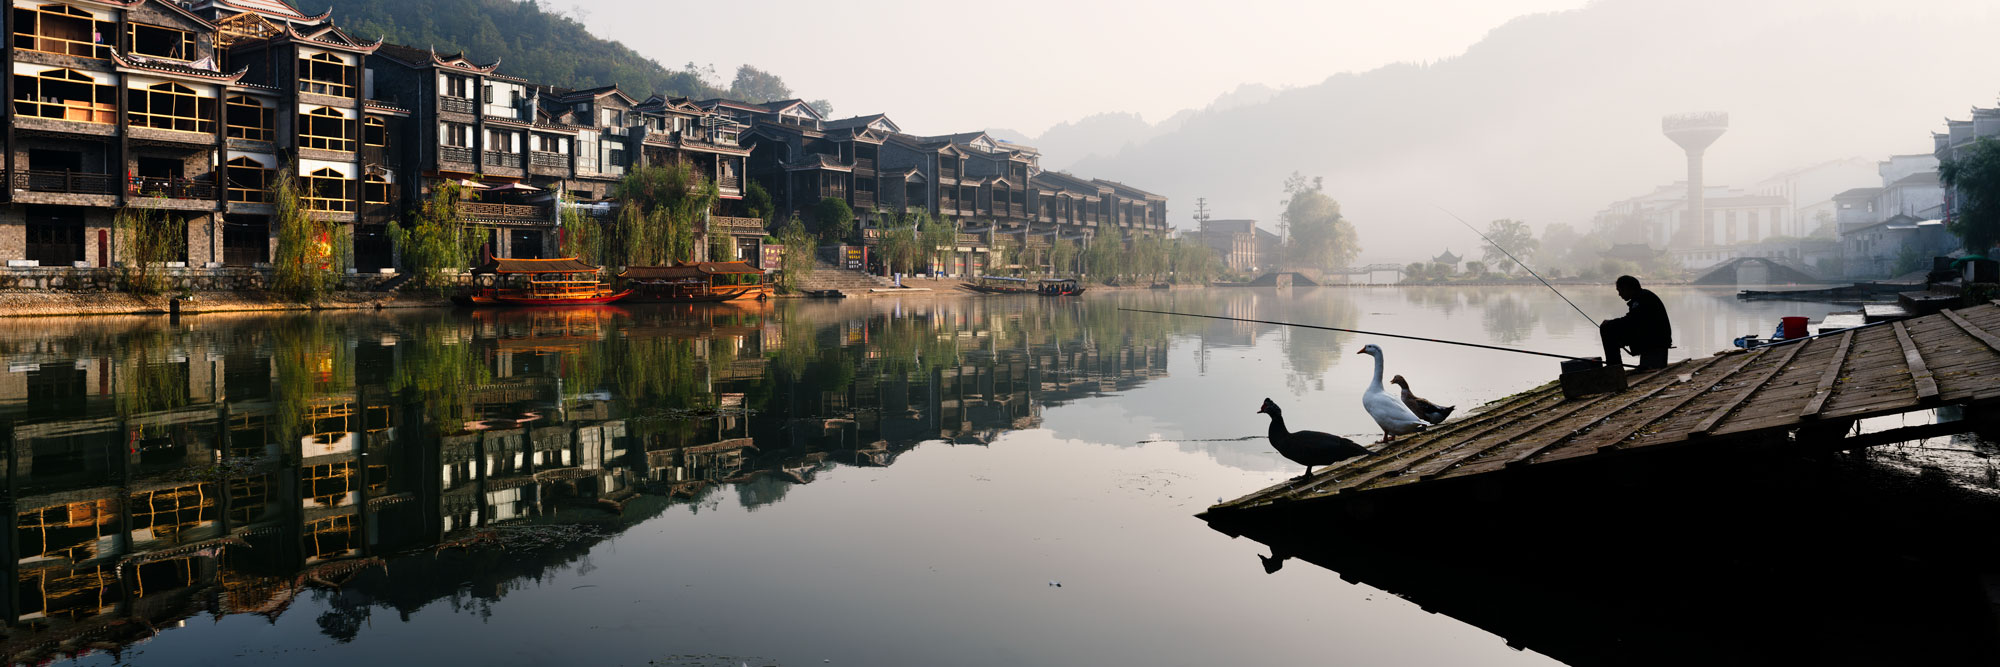 Panorama of Fenghuang Old Town fishing in the morning mist